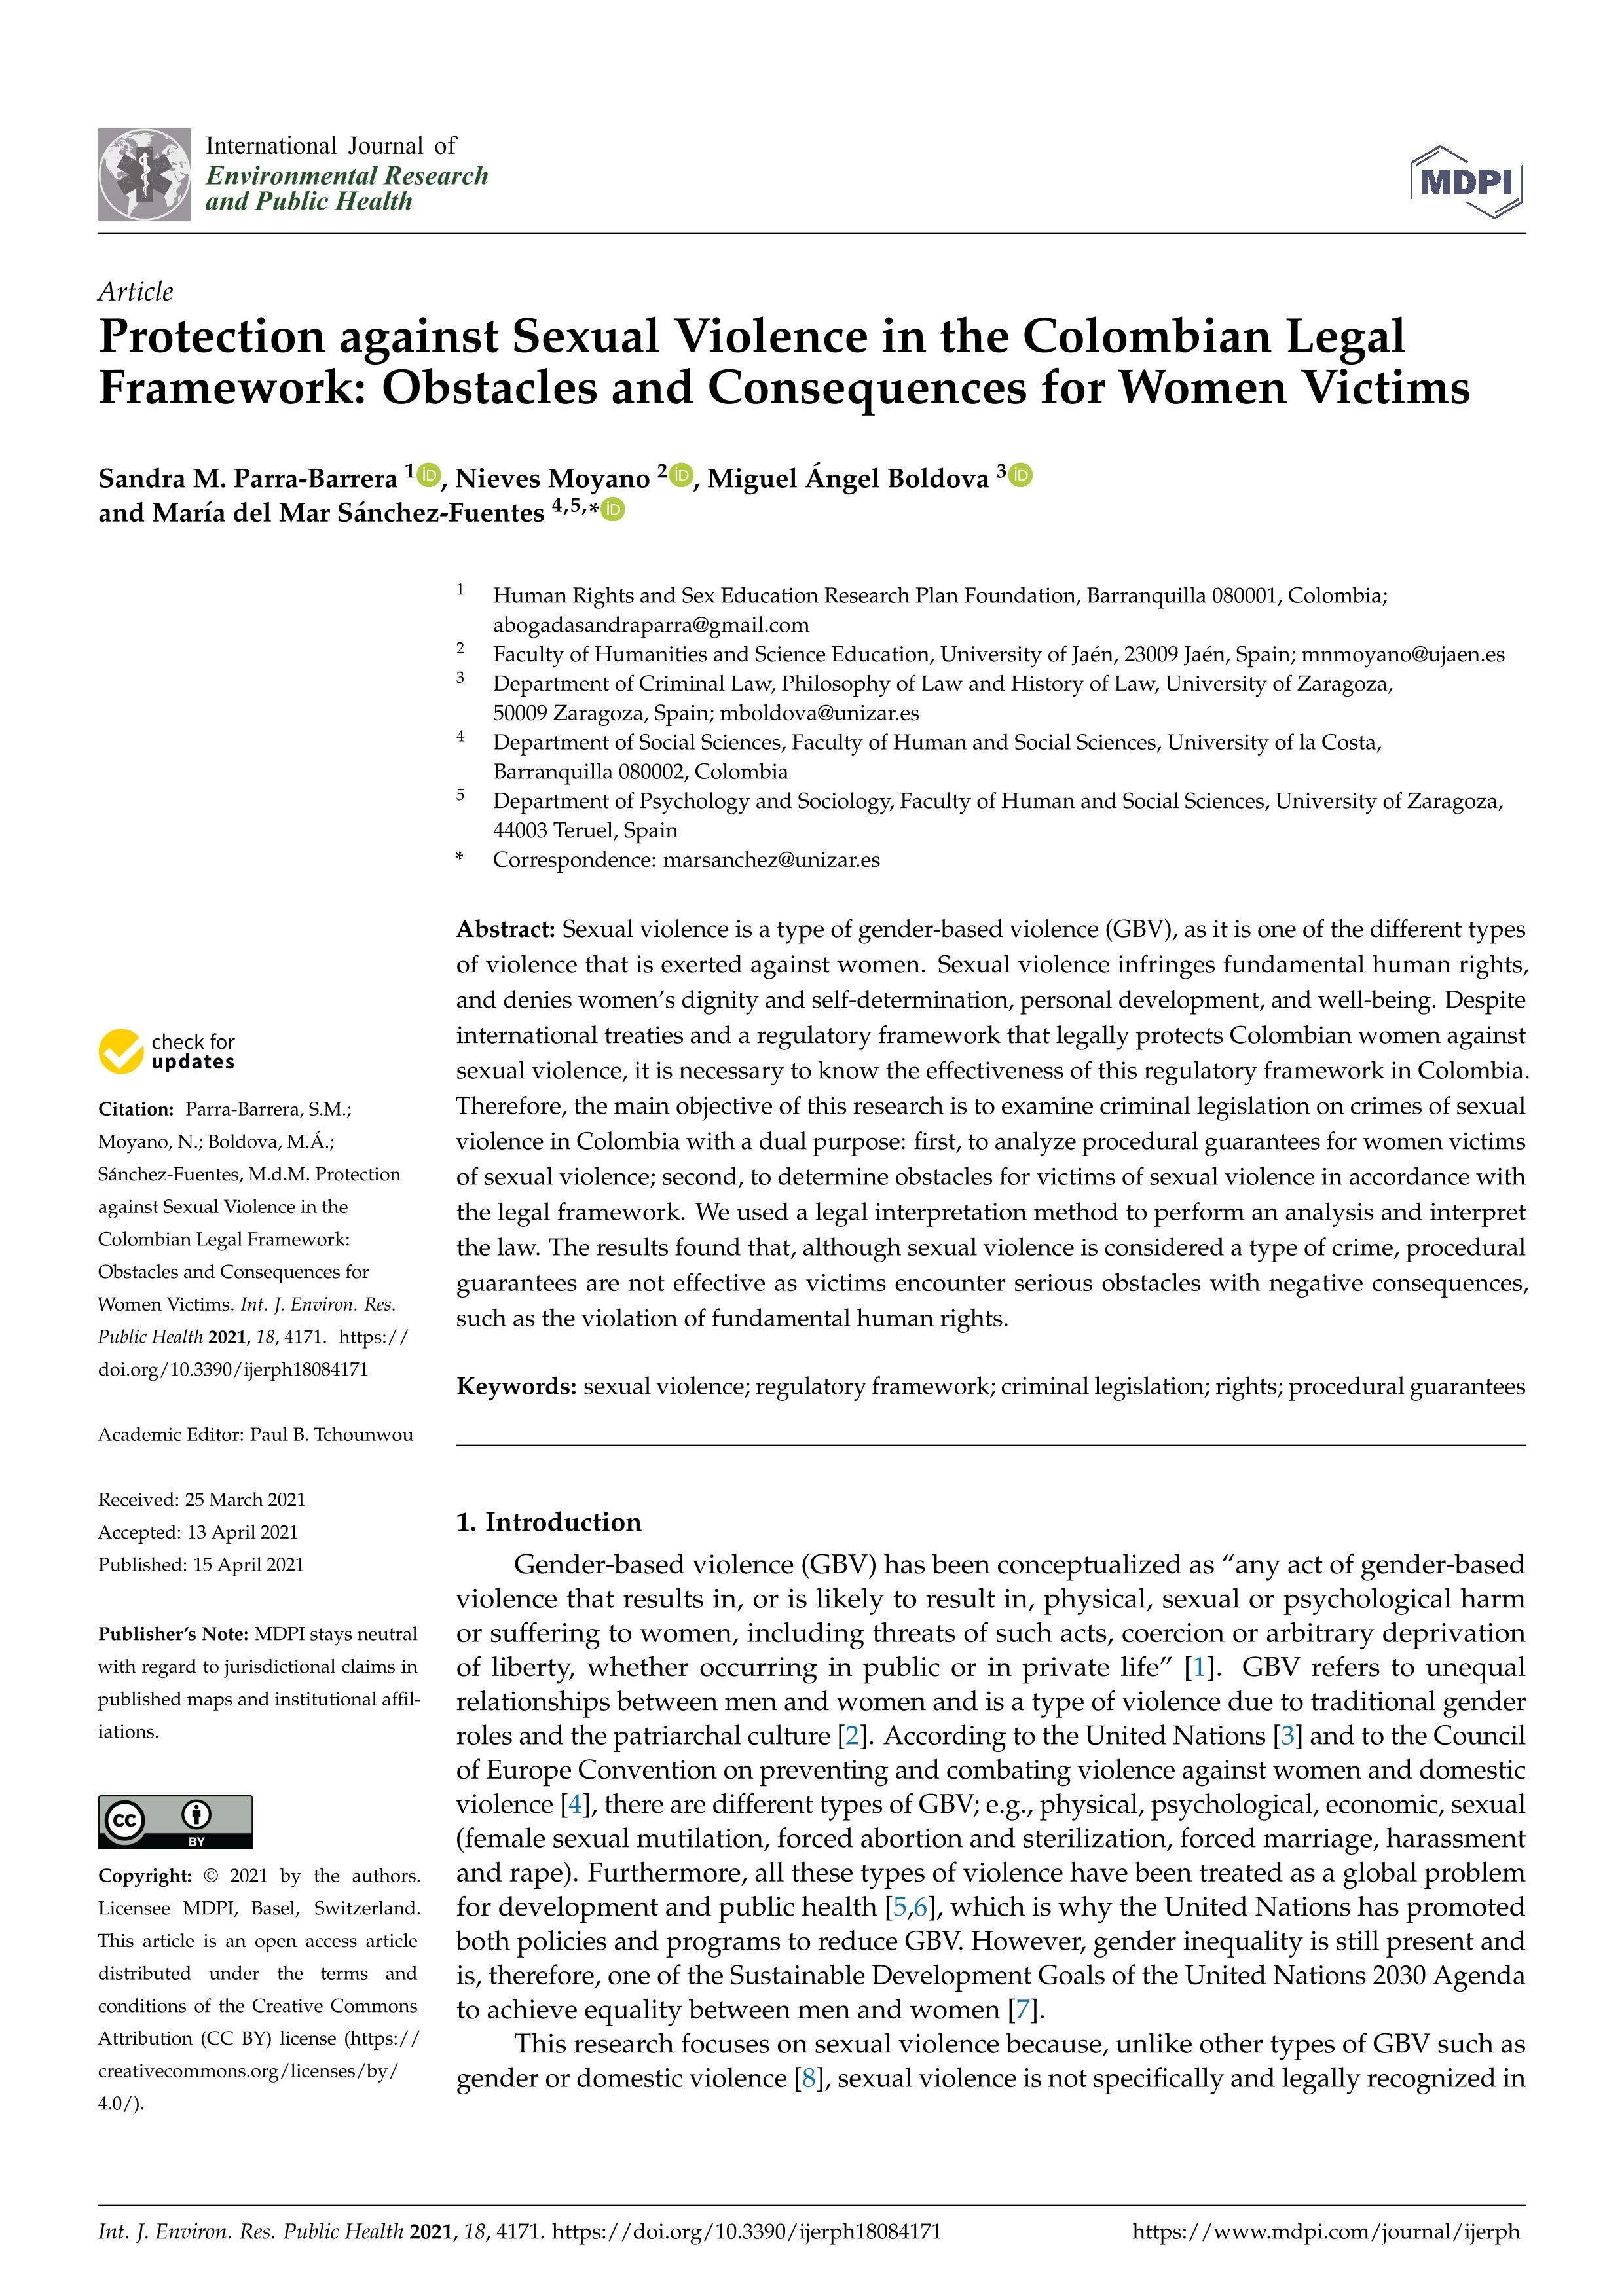 Protection against sexual violence in the Colombian legal framework: obstacles and consequences for women victims